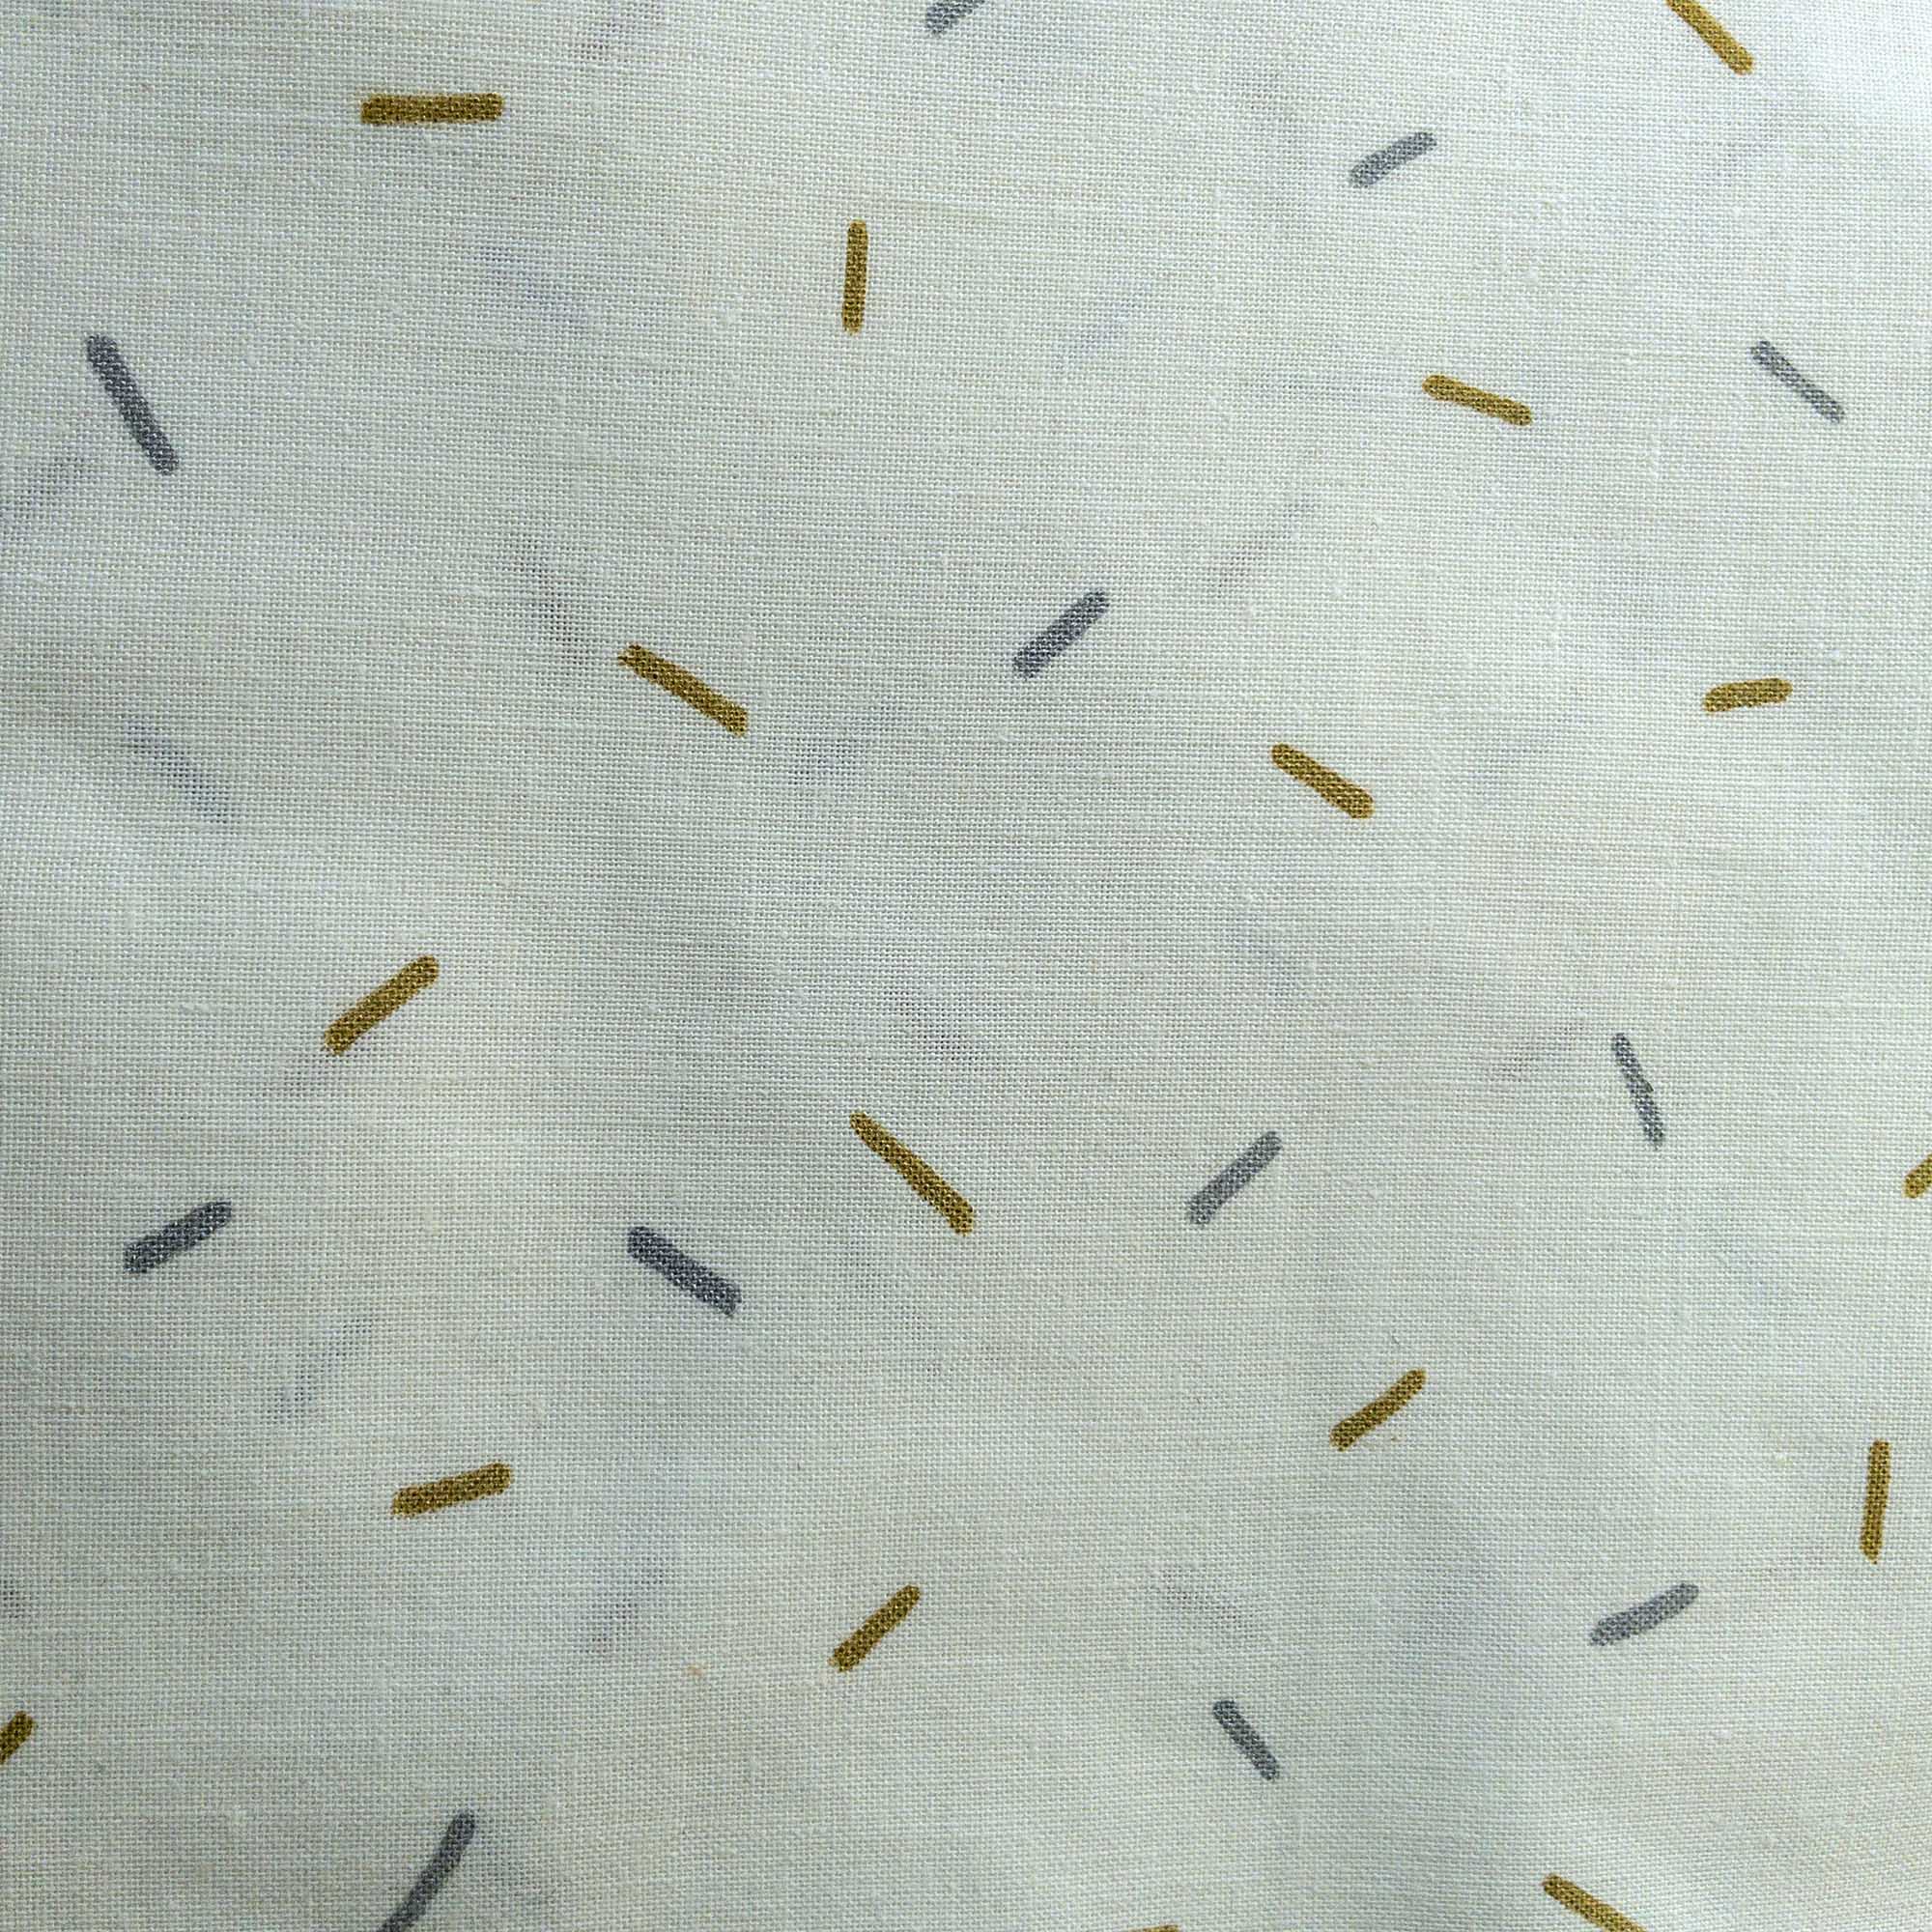 close up of colorful confetti pattern painted with gold and silver